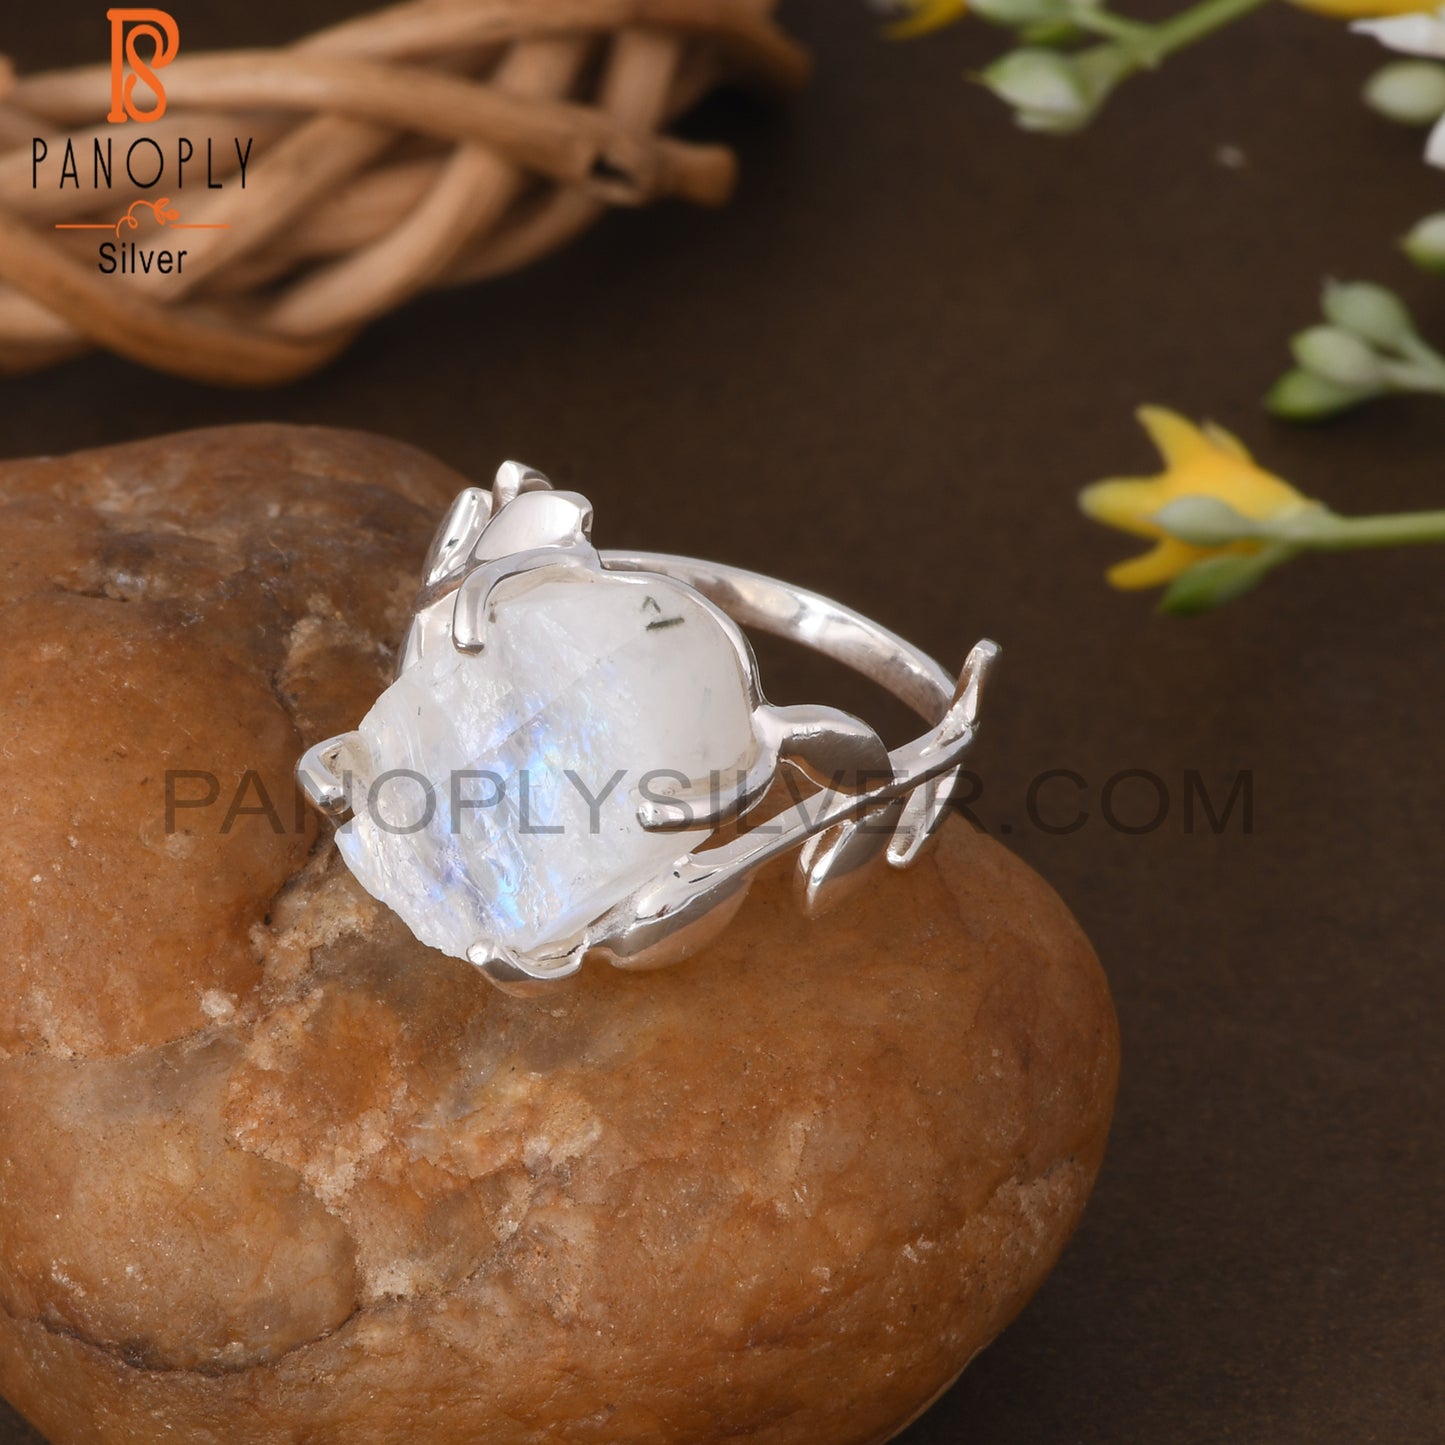 Rainbow Moonstone 925 Sterling Silver Leaf Branch Ring